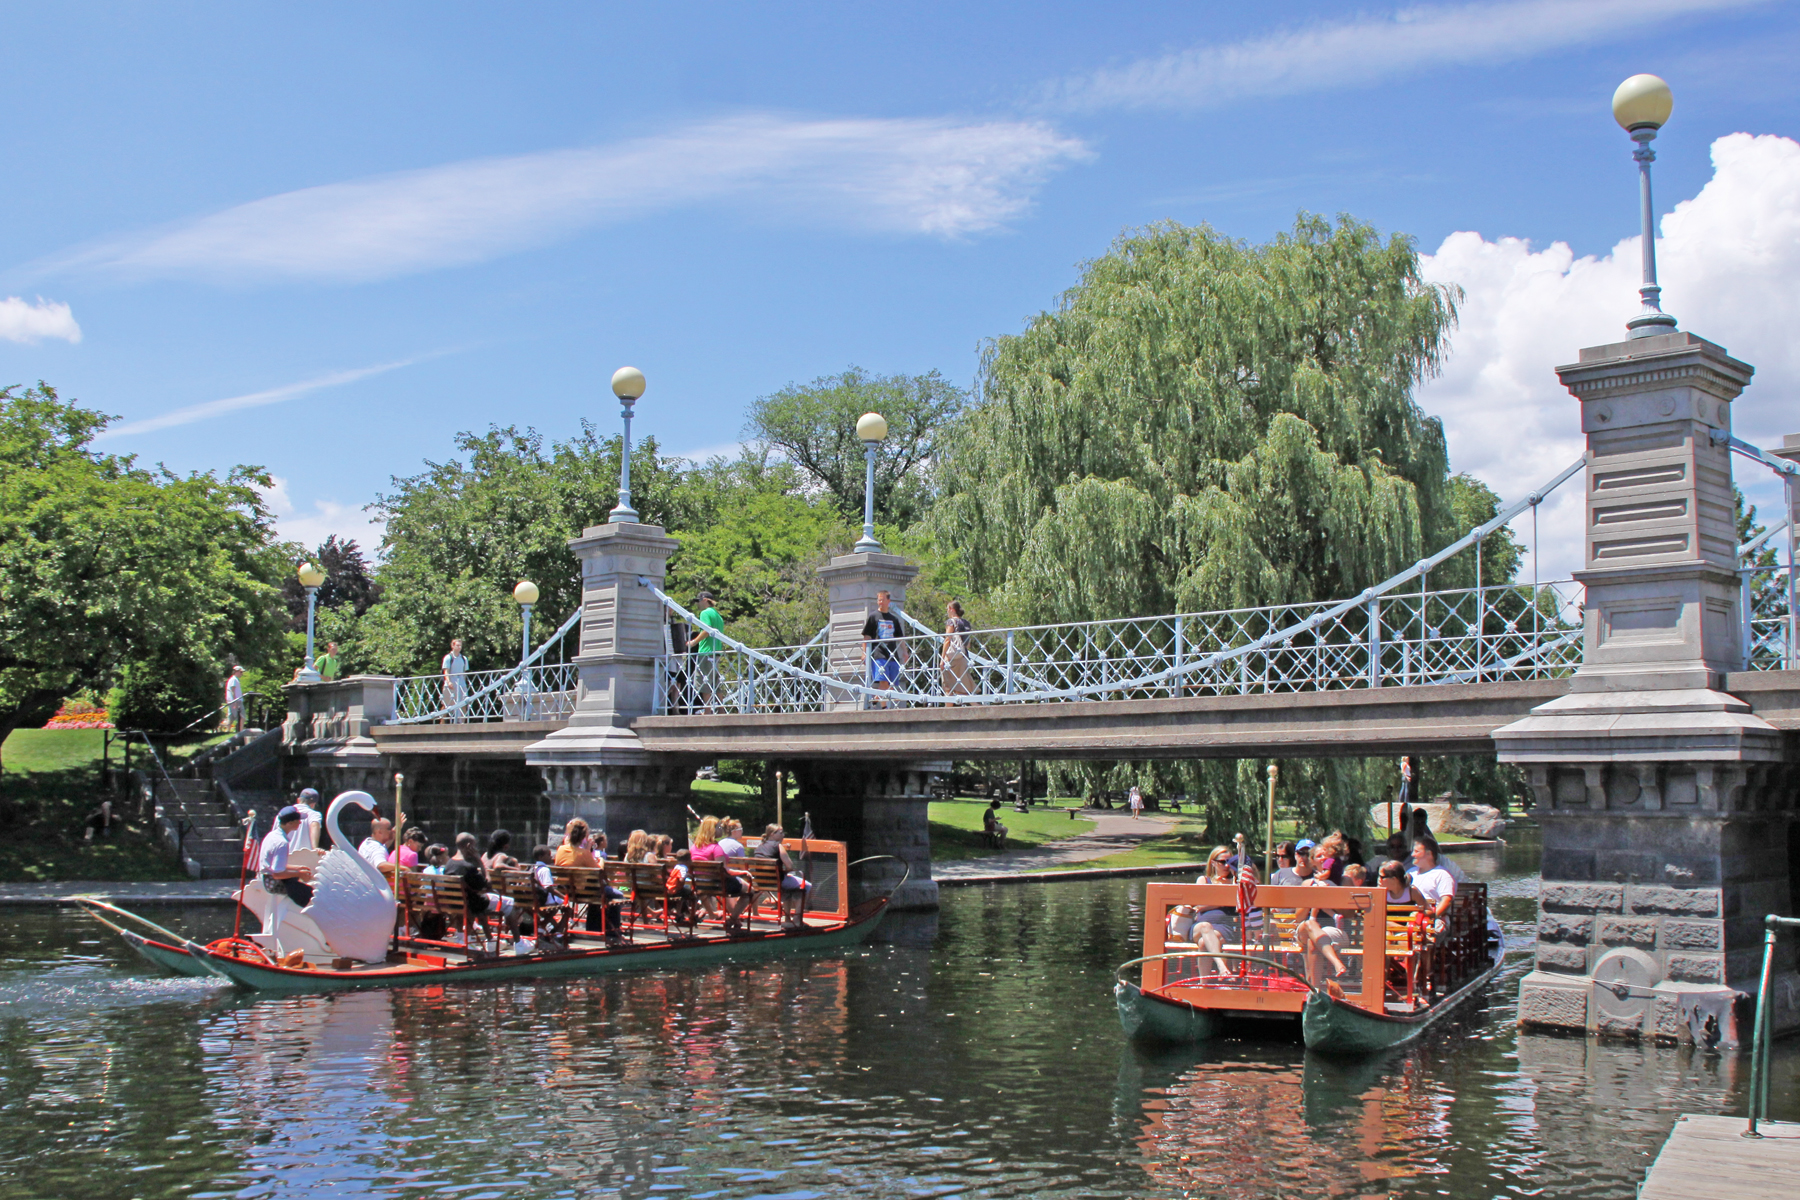 Summer Swan Boats, Boston Public Garden (user submitted)